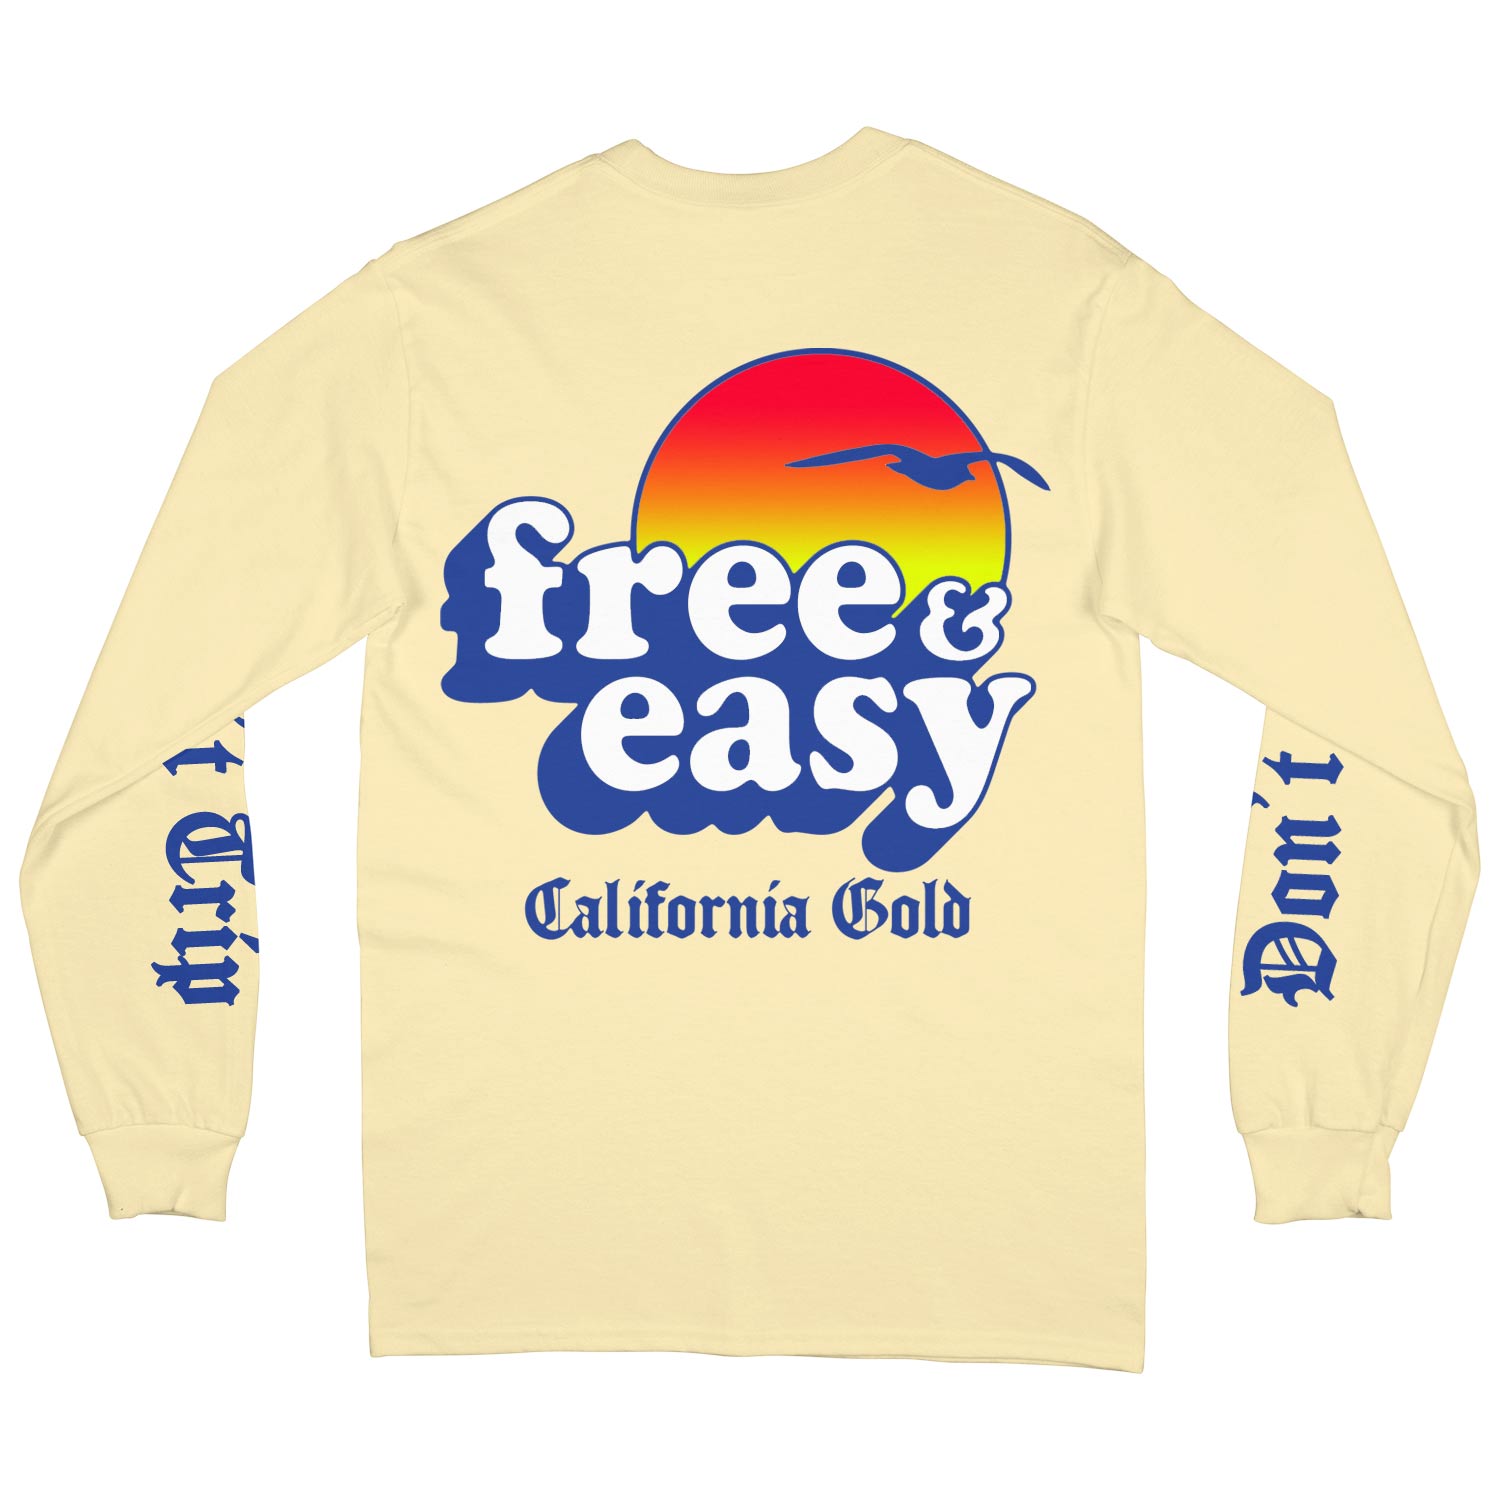 Baja Sun Long Sleeve Tee in light yellow with white navy and orange Free & Easy California Gold sun bird design on a white background, back - Free & Easy